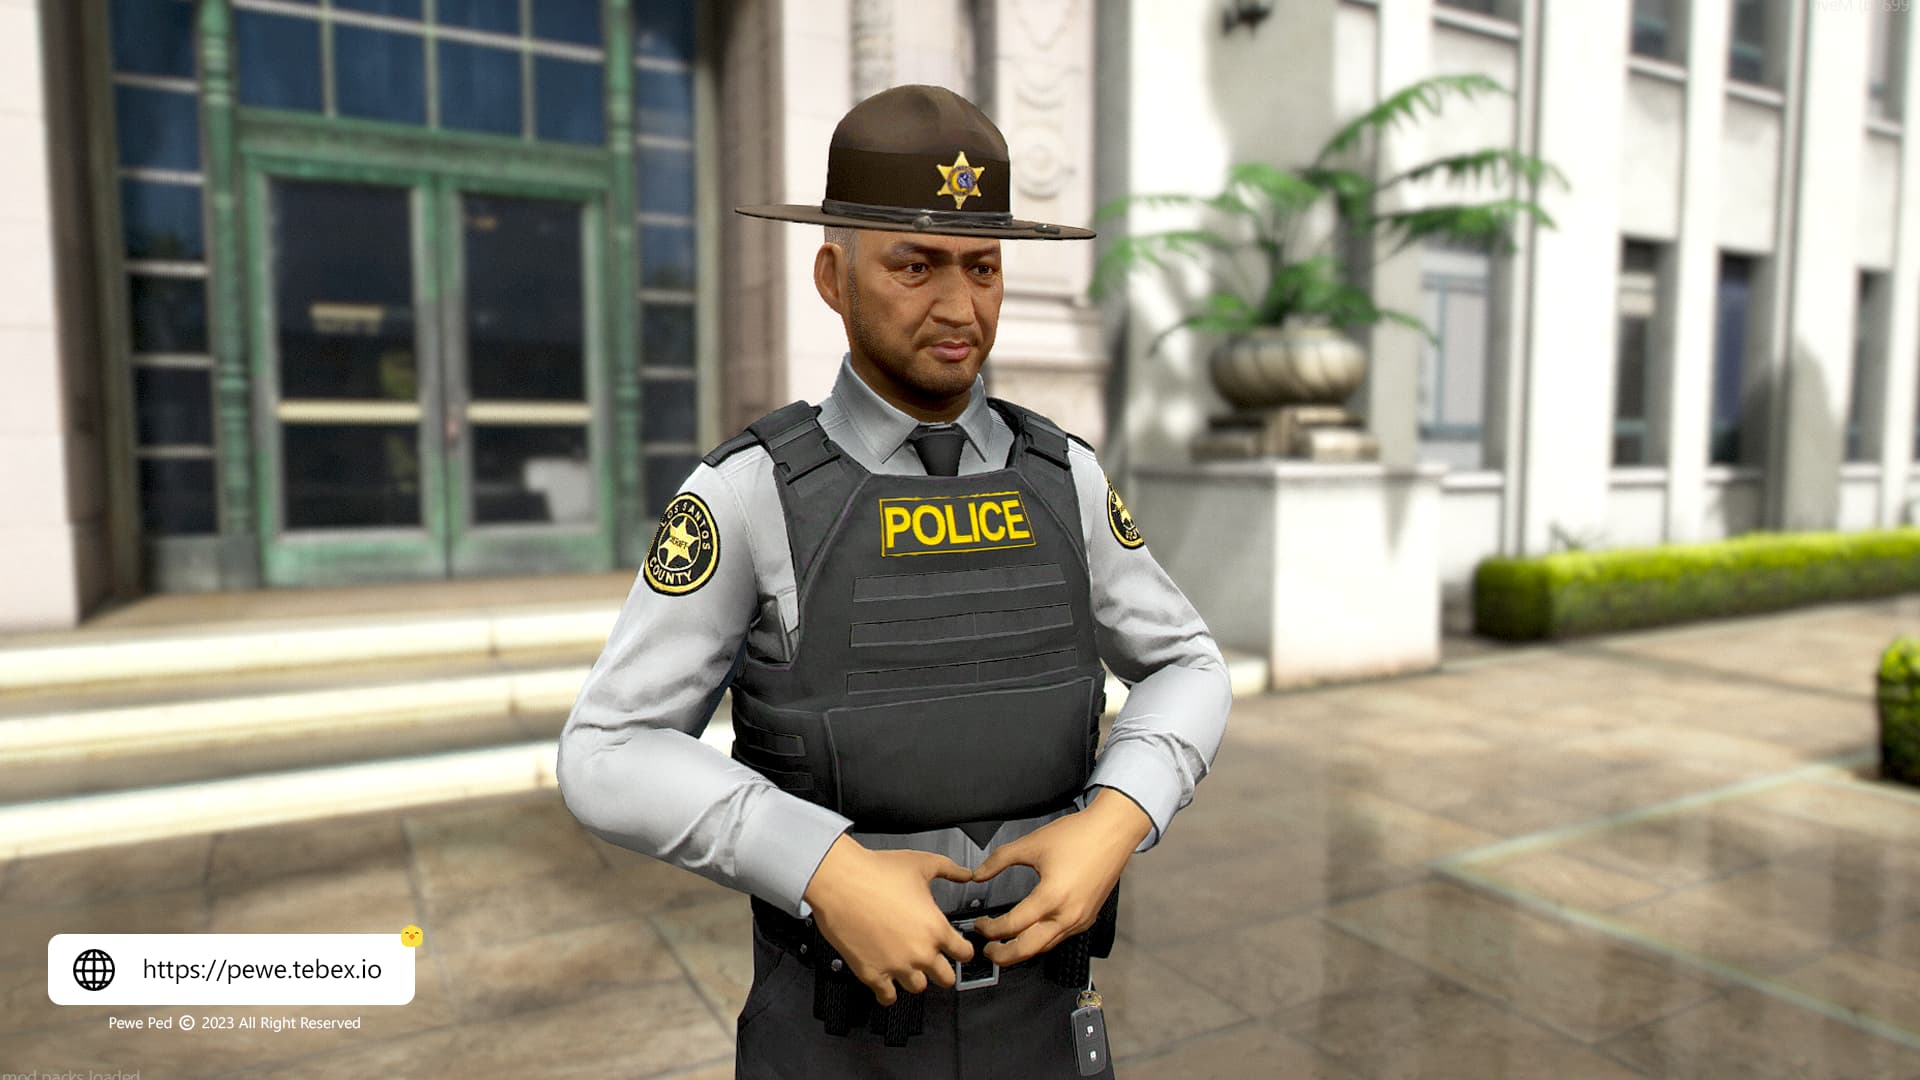 [PED] POLICE CHENG (Custom Ped) - Releases - Cfx.re Community